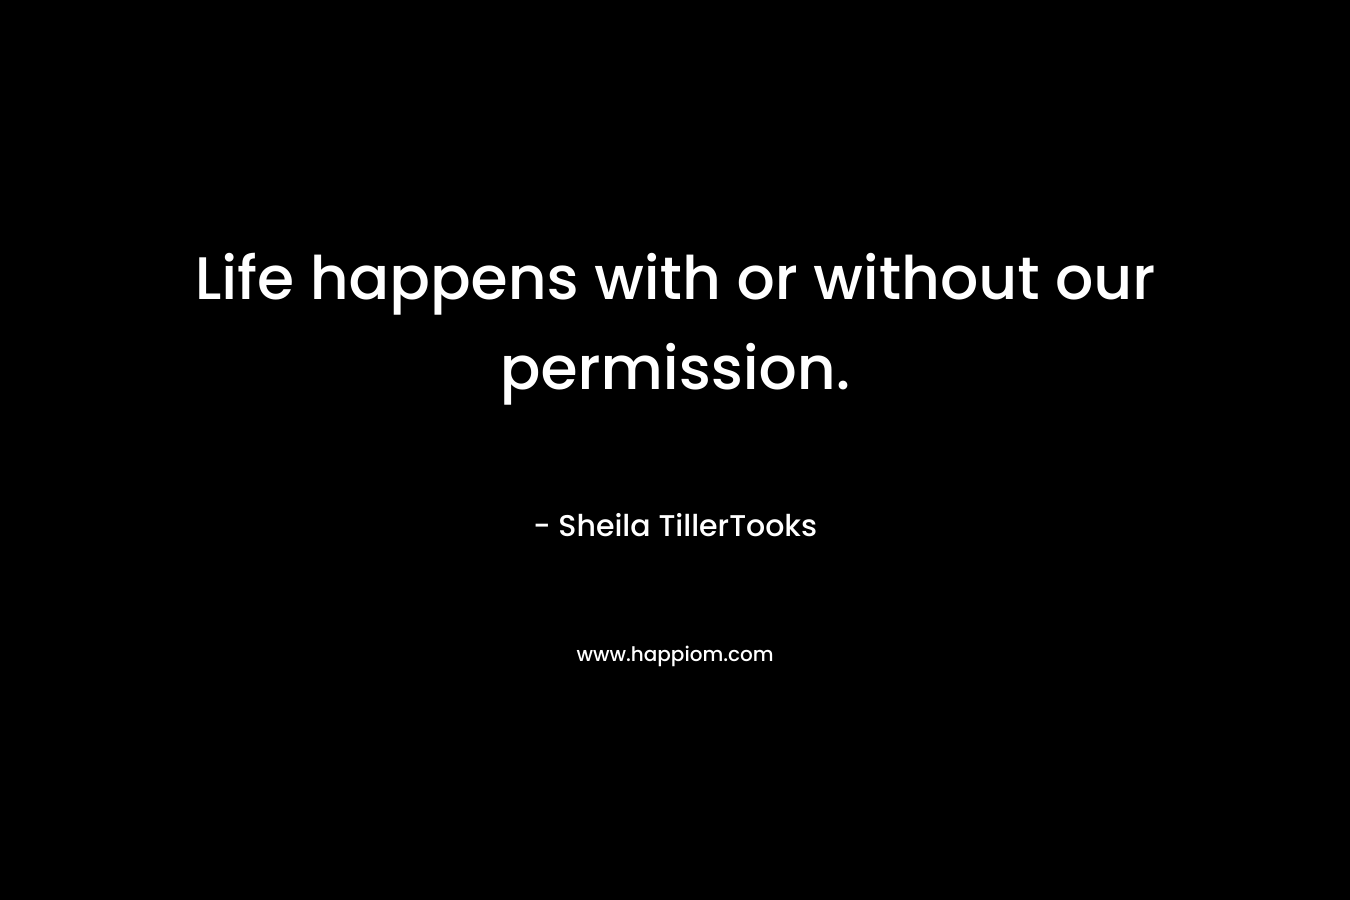 Life happens with or without our permission. – Sheila TillerTooks